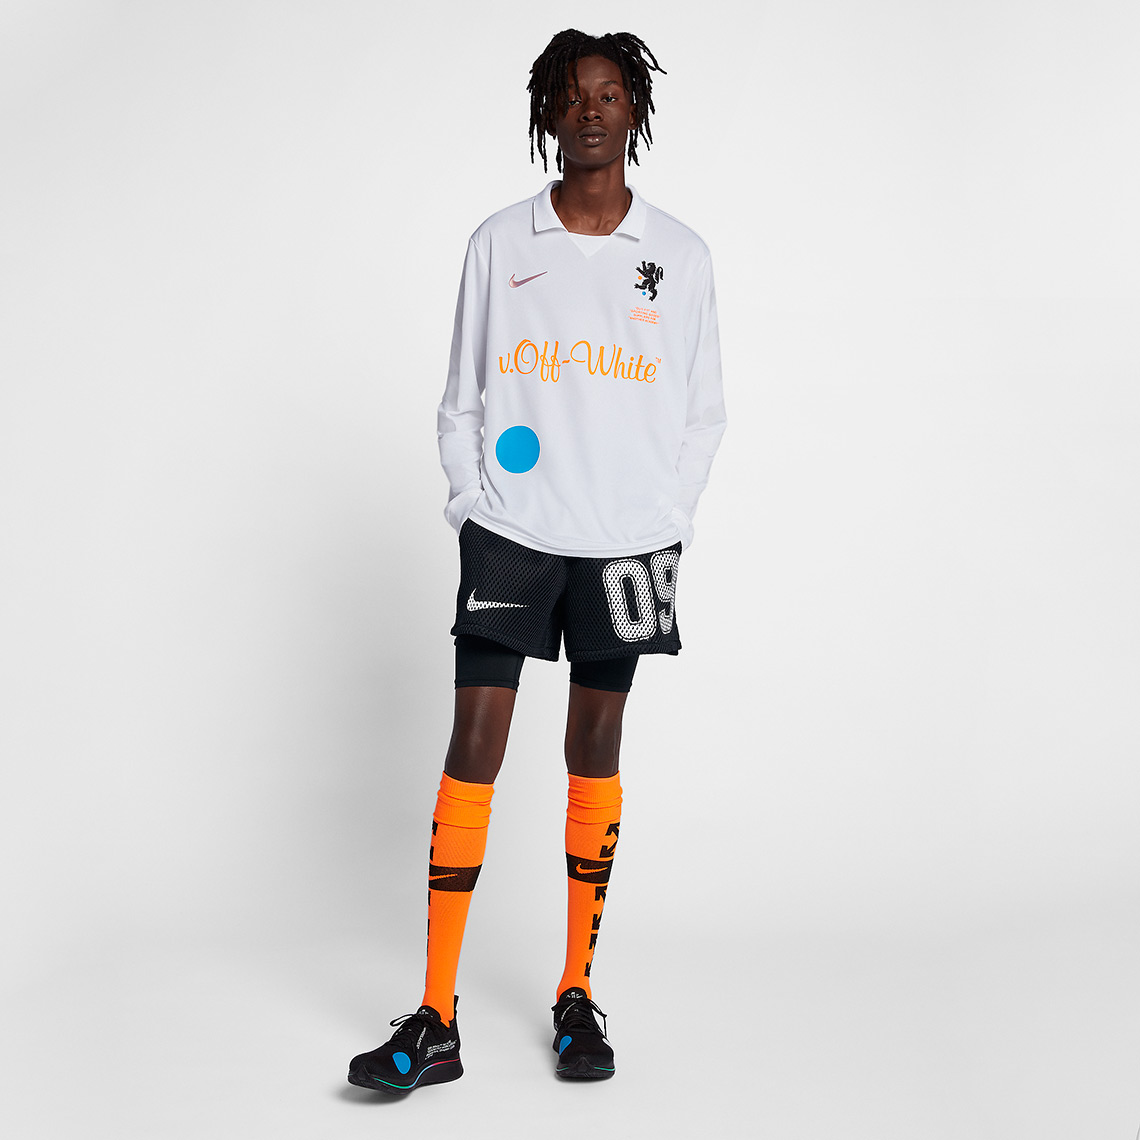 jersey off white nike